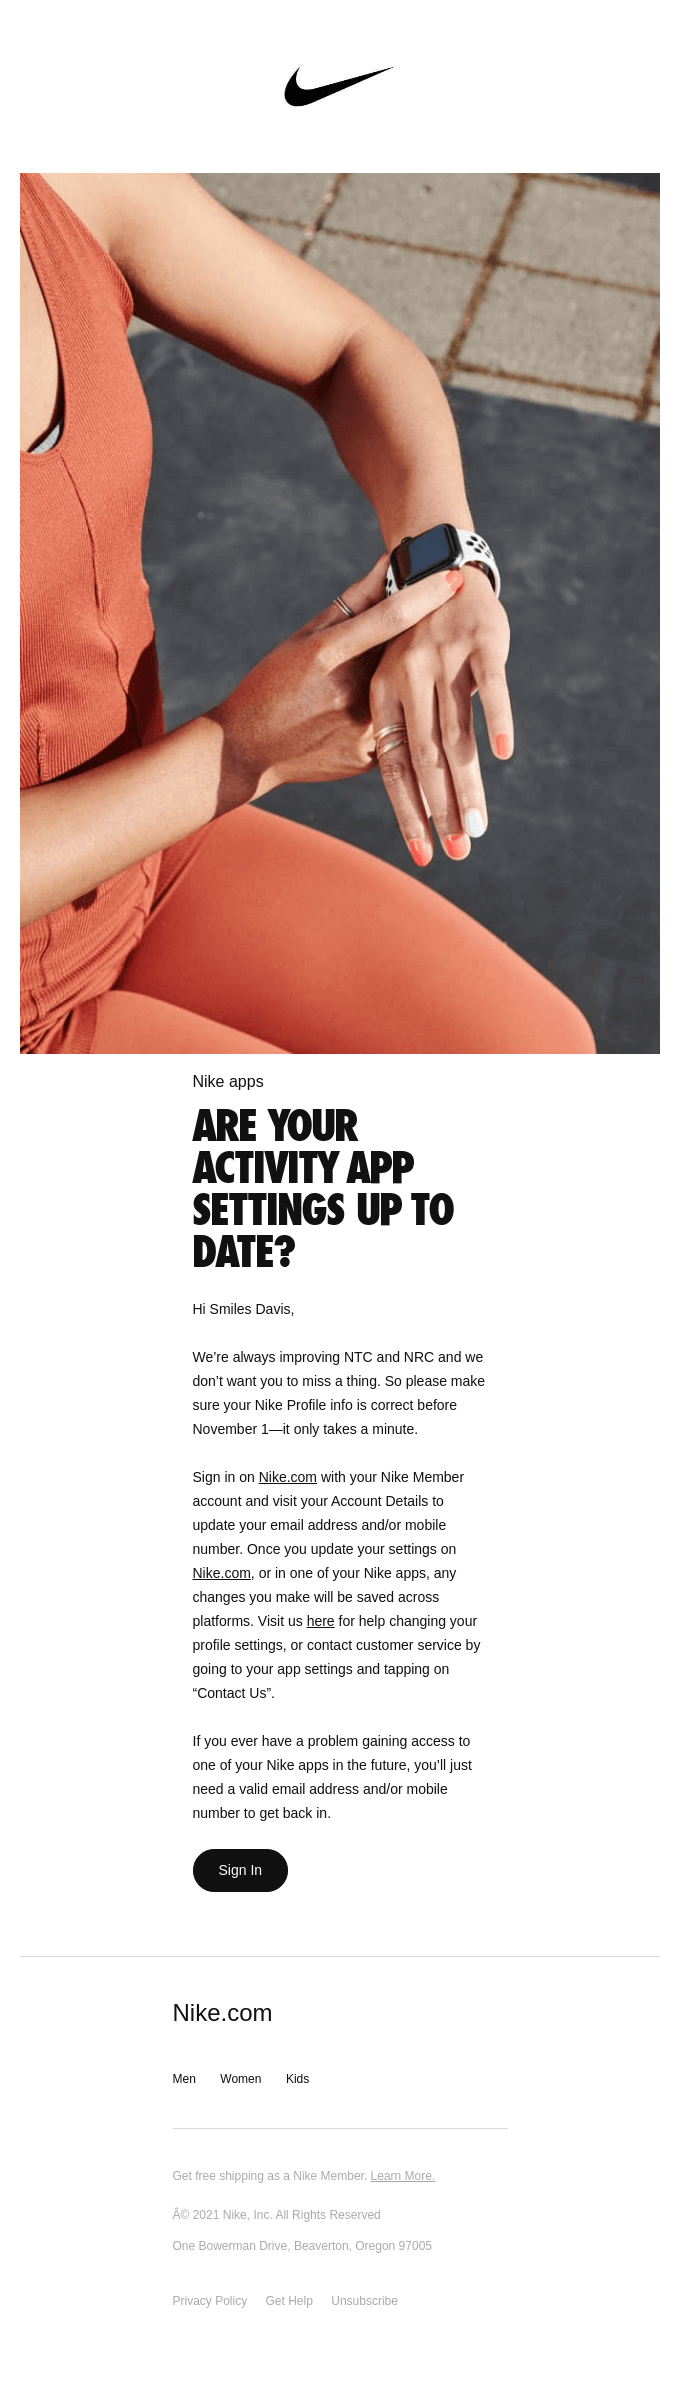 Exclusión Preguntarse cueva Nike Activity App Update: Don't Miss a Thing from Nike - Desktop Email View  | Really Good Emails